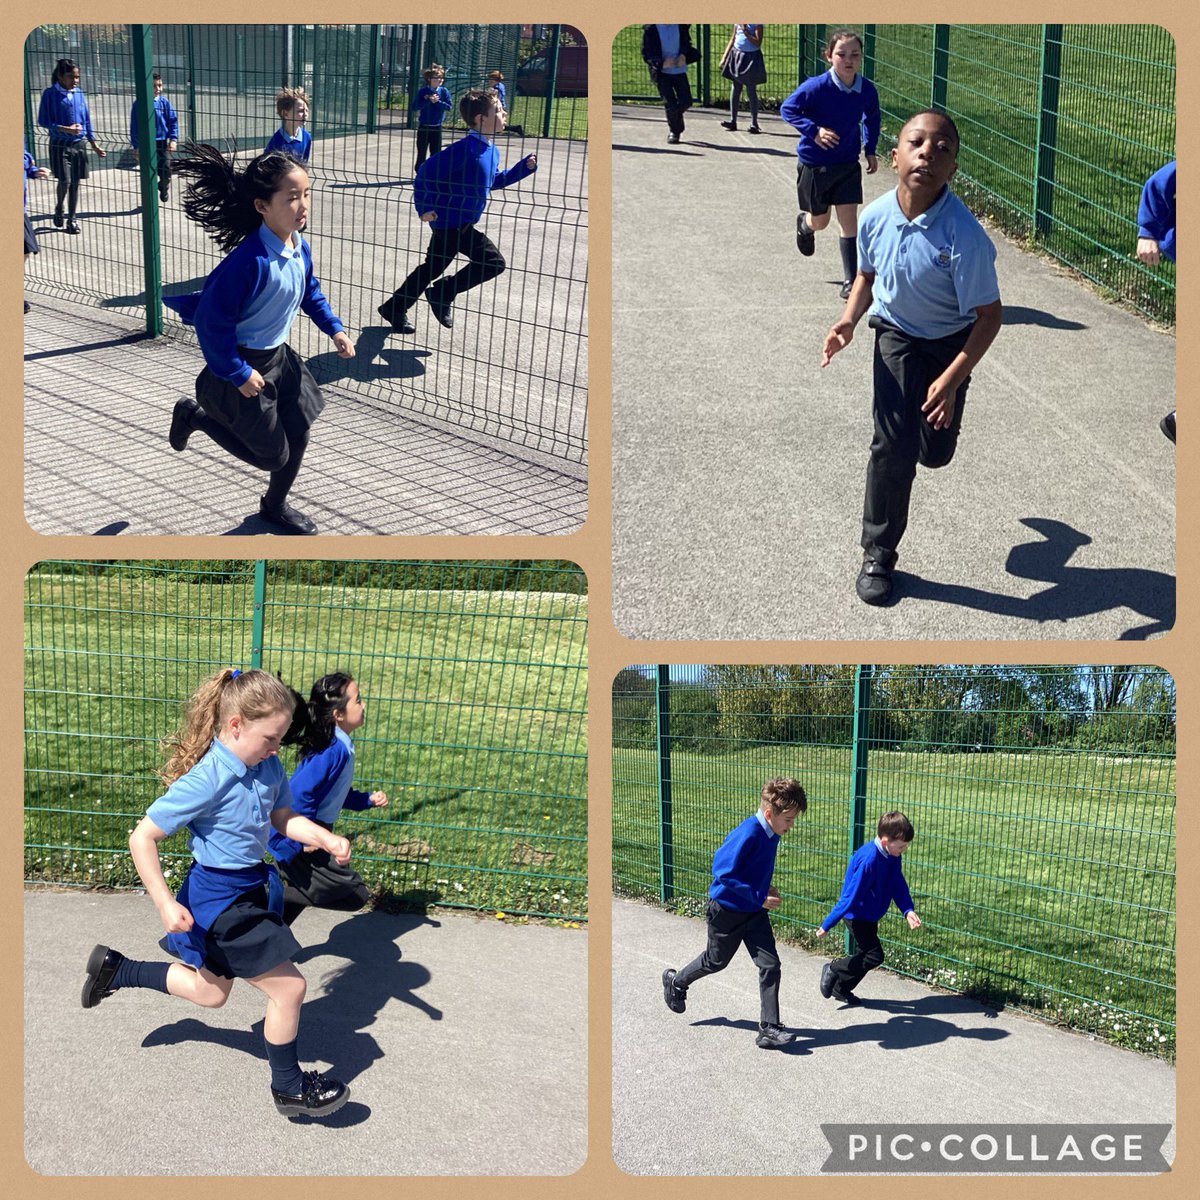 Year 4 loved taking part in our mini marathon for #kNOwknifecrime this afternoon, and we loved the cakes afterwards too! @BedfordPrimary @SouthportLTrust